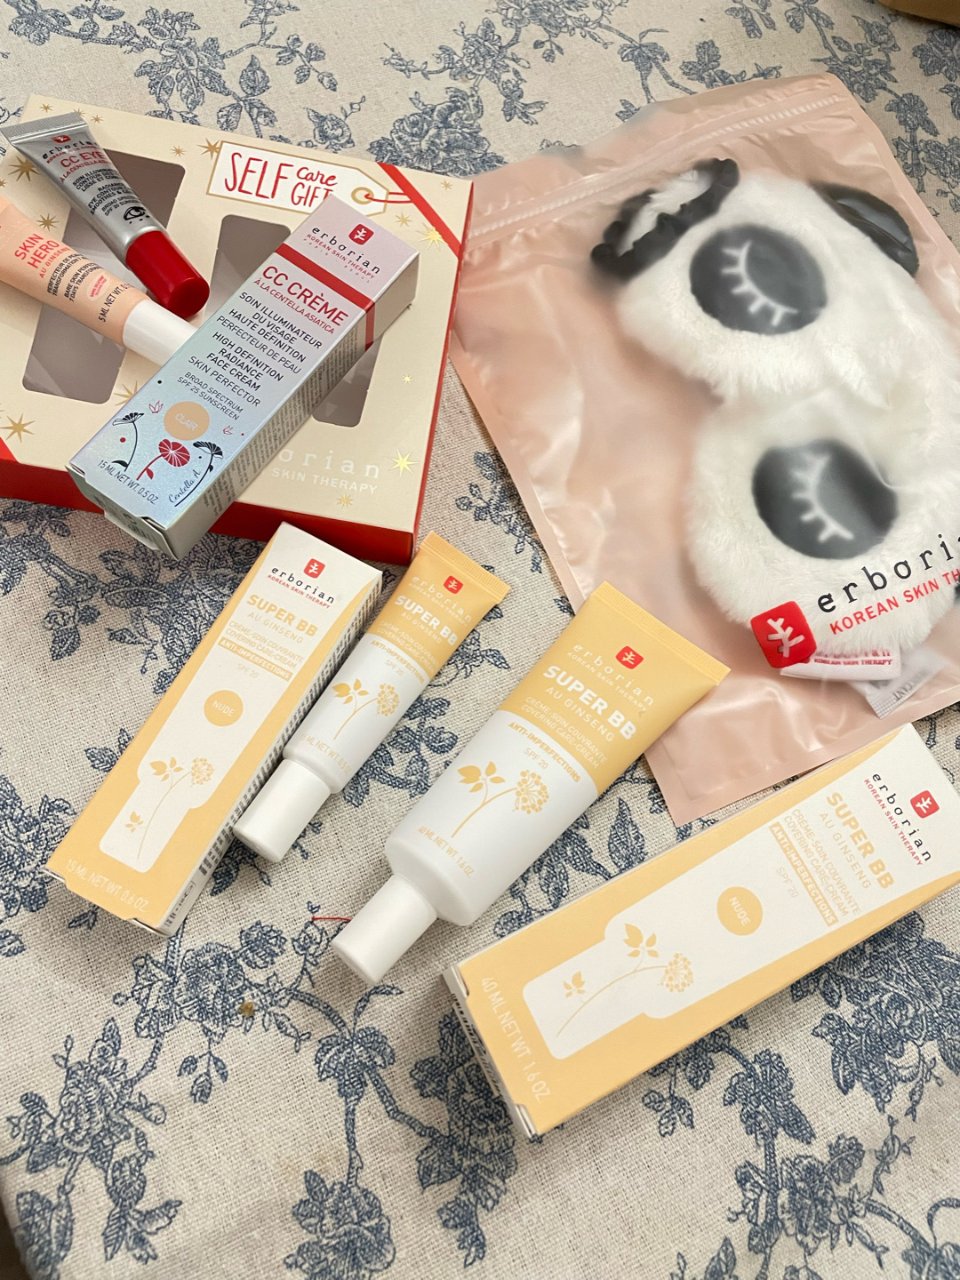 Christmas Kit with CC Cream - Natural Complexion Routine,Erborian 艾博妍